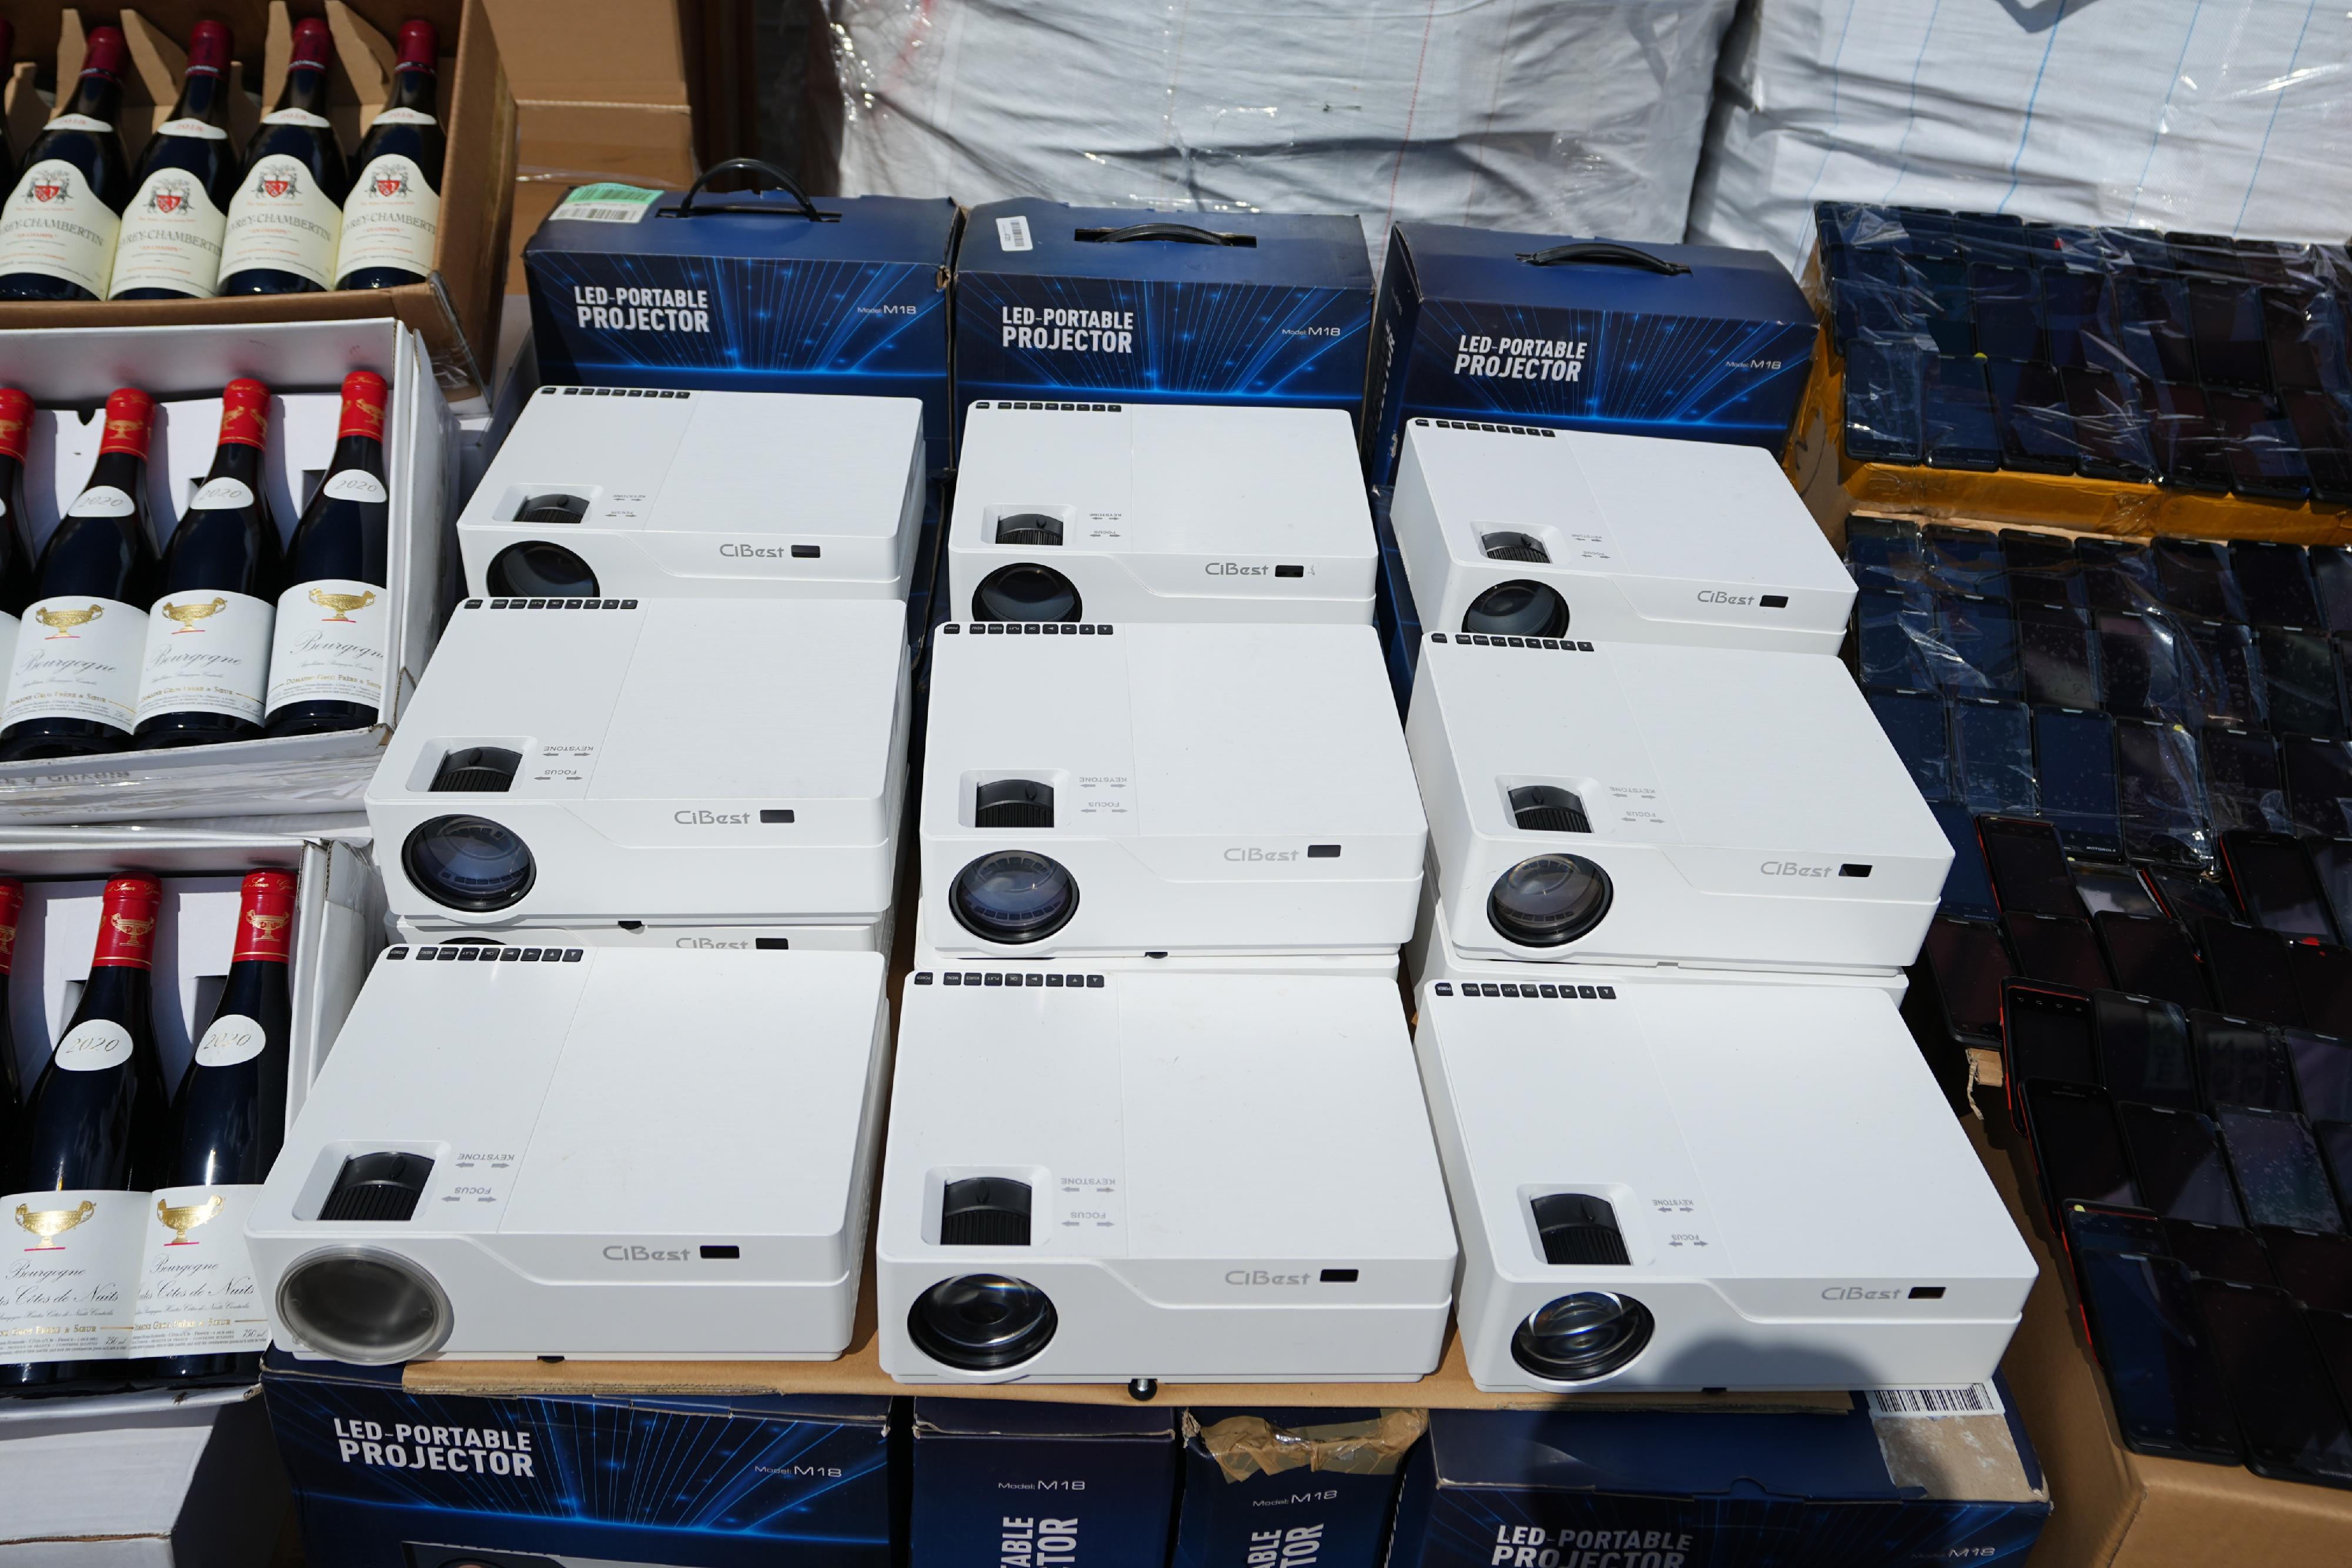 Hong Kong Customs mounted a special operation codenamed "Wave Breaker" from August to September and detected four suspected smuggling cases involving ocean-going vessels and two suspected smuggling cases involving river trade vessels. A large batch of suspected smuggled goods with a total estimated market value of about $100 million was seized. Photo shows some of the electronic products seized.